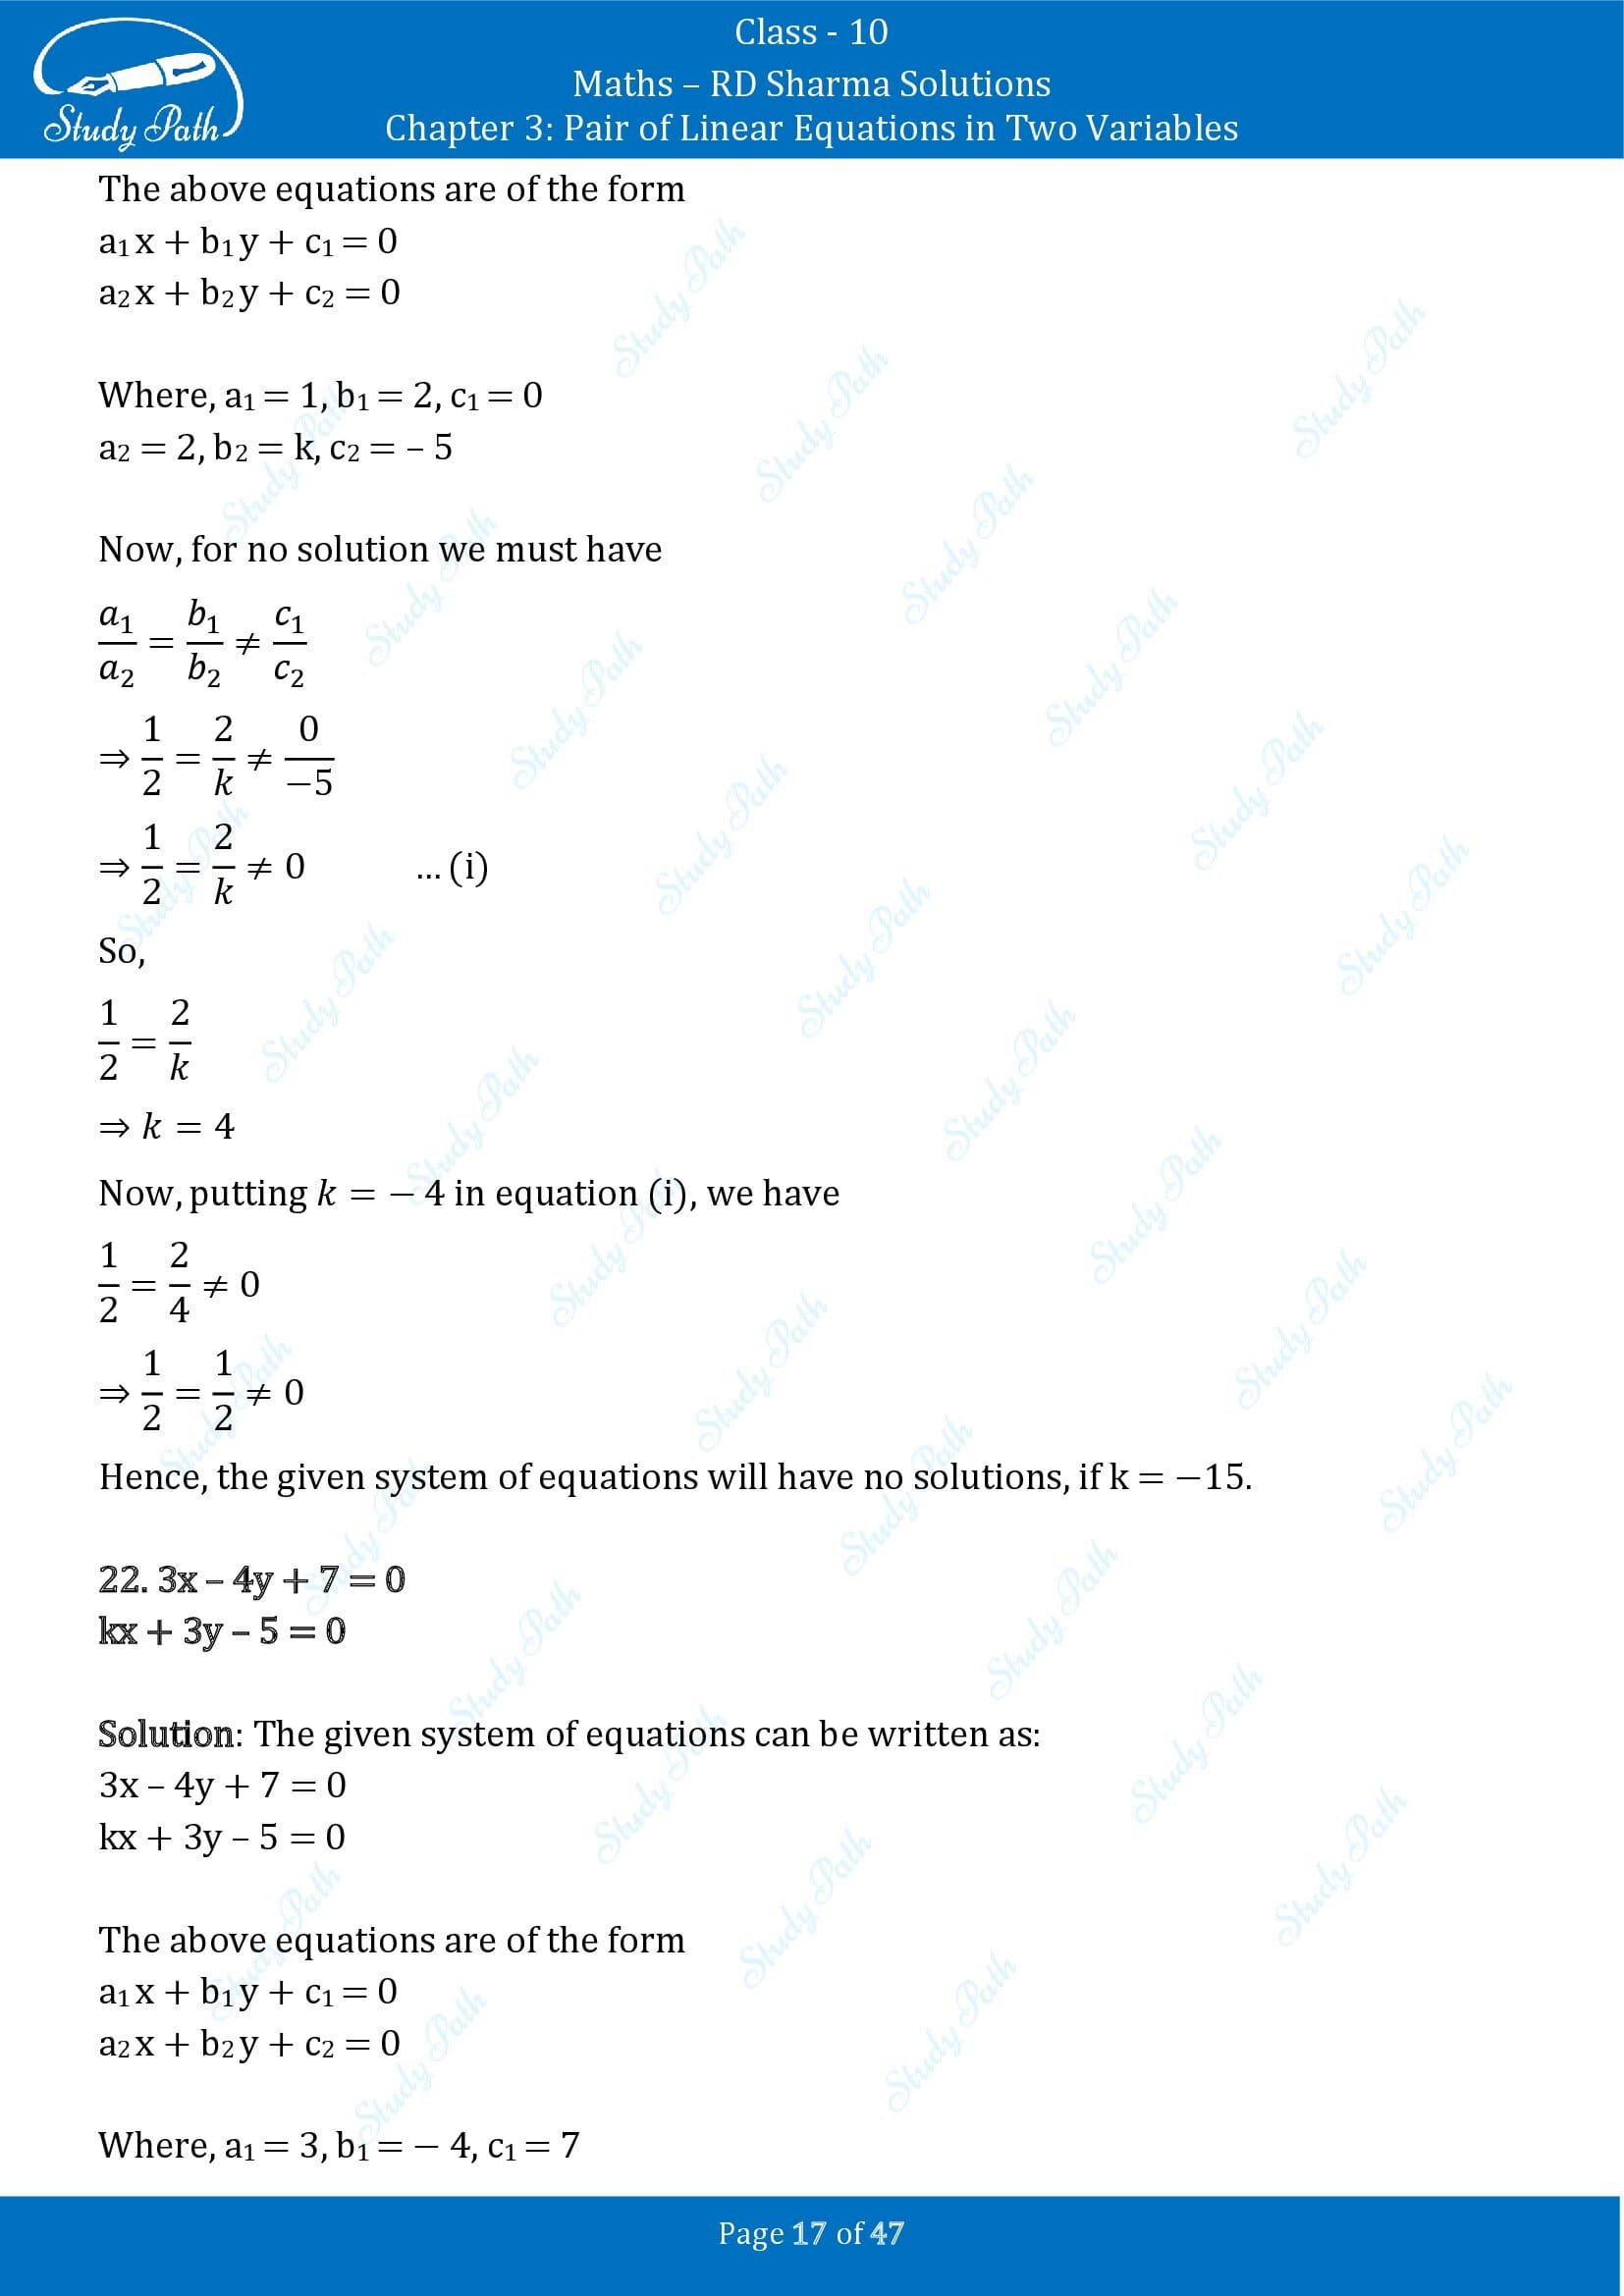 RD Sharma Solutions Class 10 Chapter 3 Pair of Linear Equations in Two Variables Exercise 3.5 00017